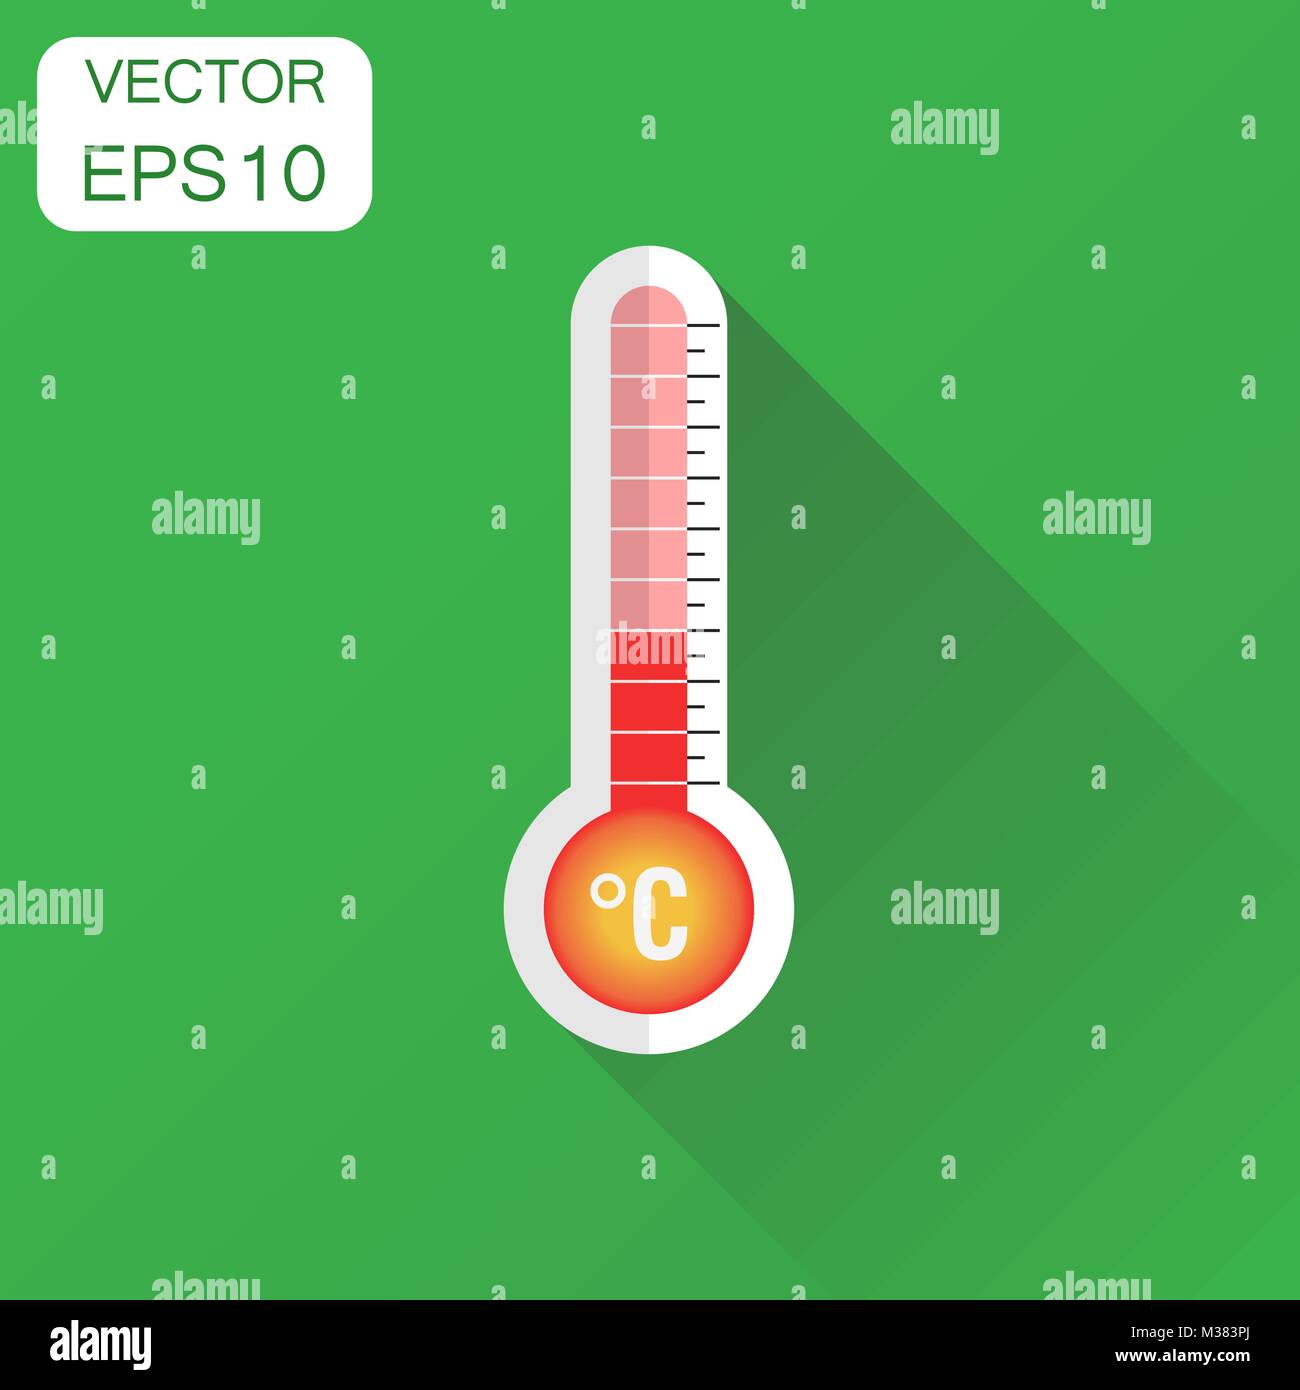 Thermometer icon. Business concept goal pictogram. Vector illustration on green background with long shadow. Stock Vector